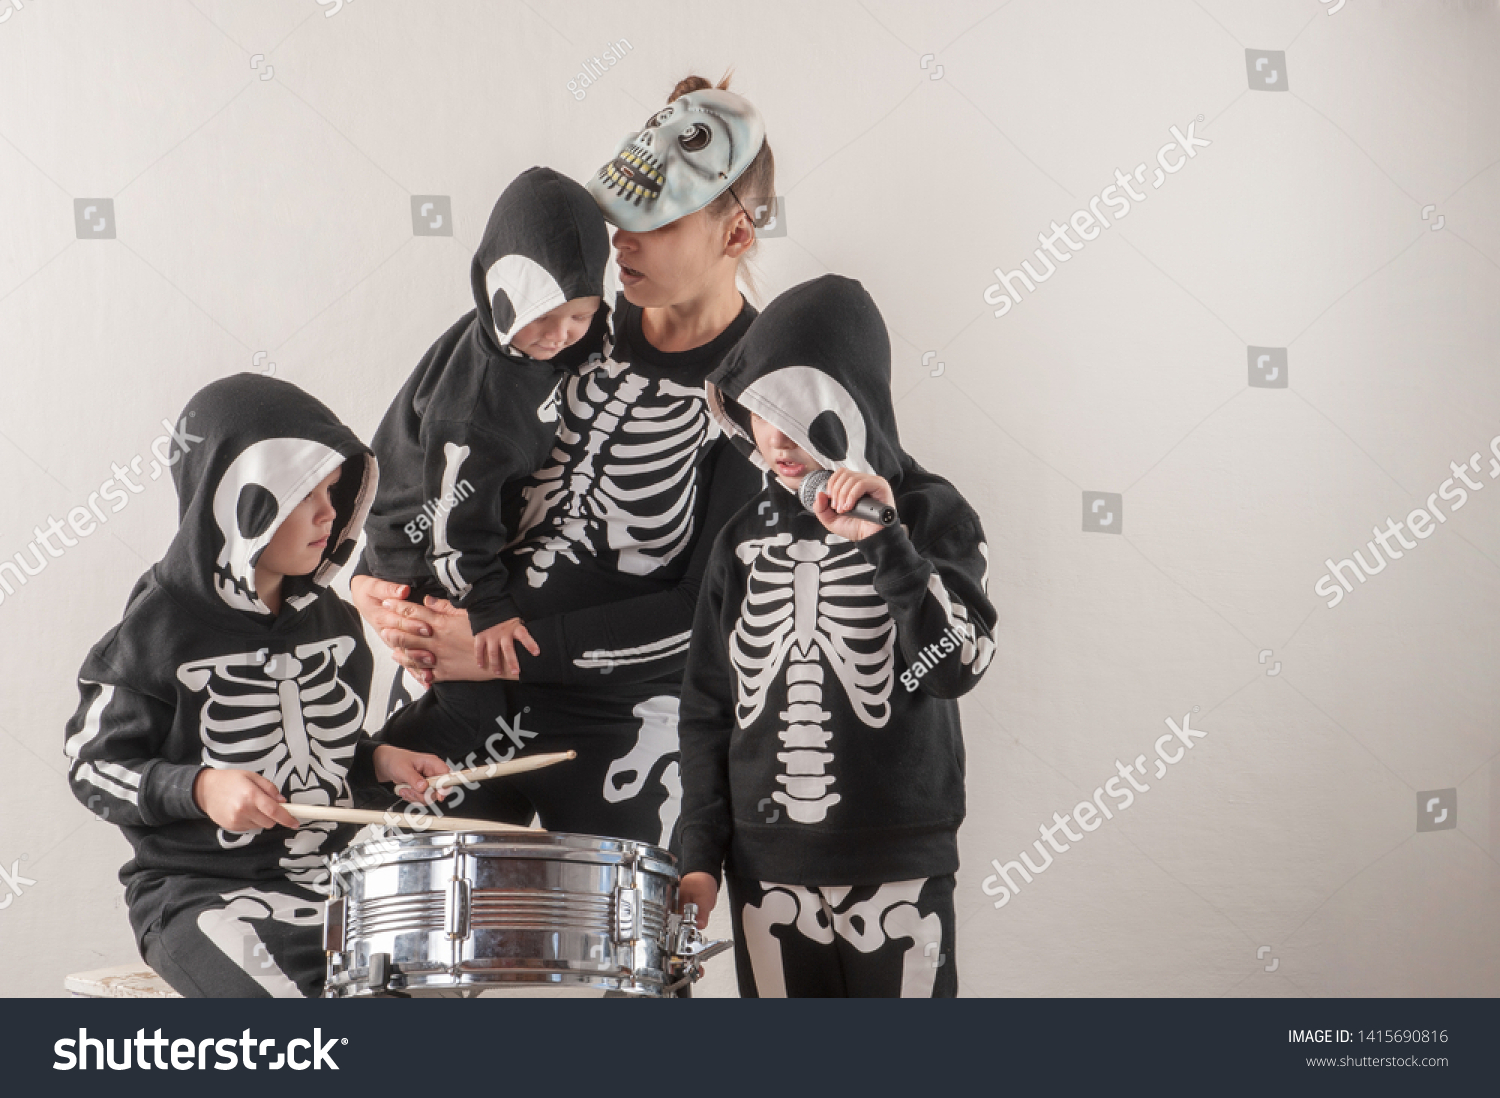 Happy friendly family of musicians in carnival costumes, boys and young mother play drum and try to sing with microphone. Black suit with image of skeletons. Classic halloween costume. Funny children #1415690816